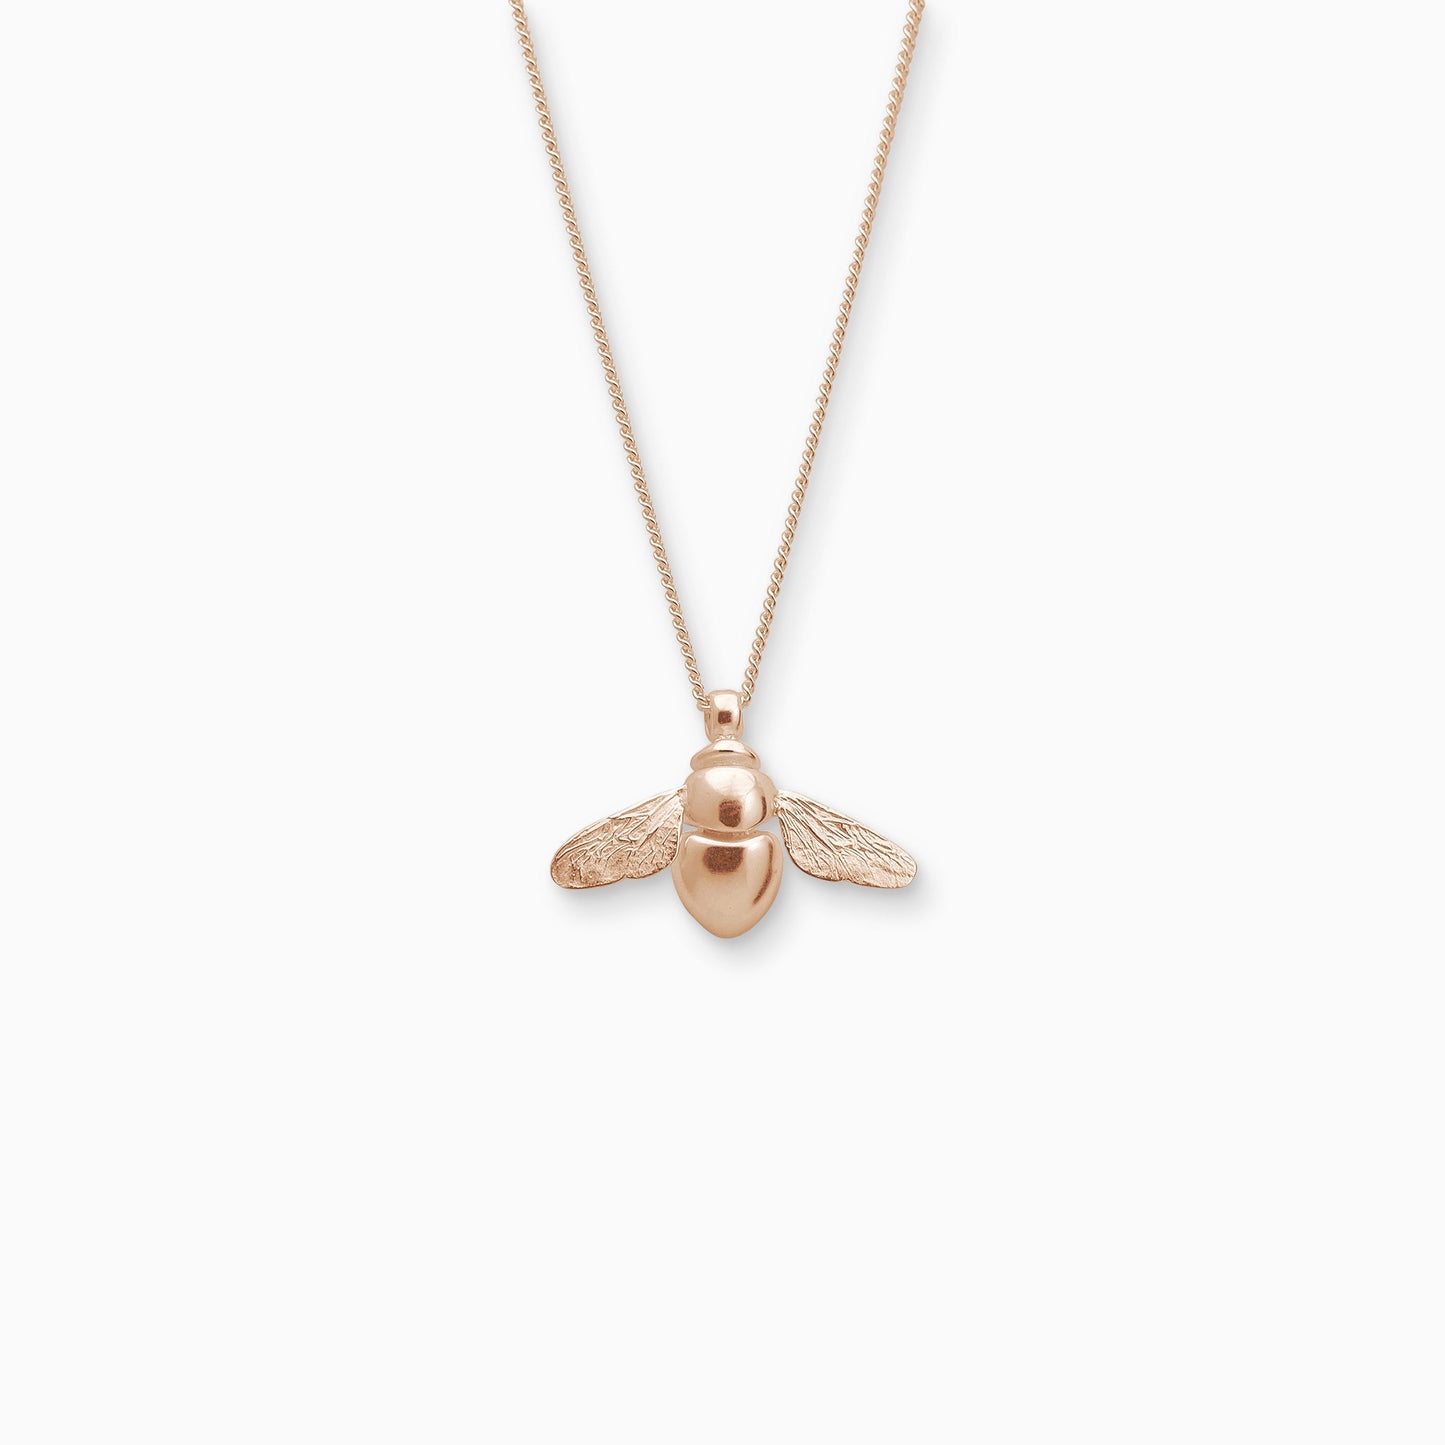 18ct Fairtrade rose gold pendant in the exact form of a Bumble Bee. 22mm x 28mm on a 45cm fine curb chain. The body of the Bee is smooth and shiny and the wings are textured with veins.